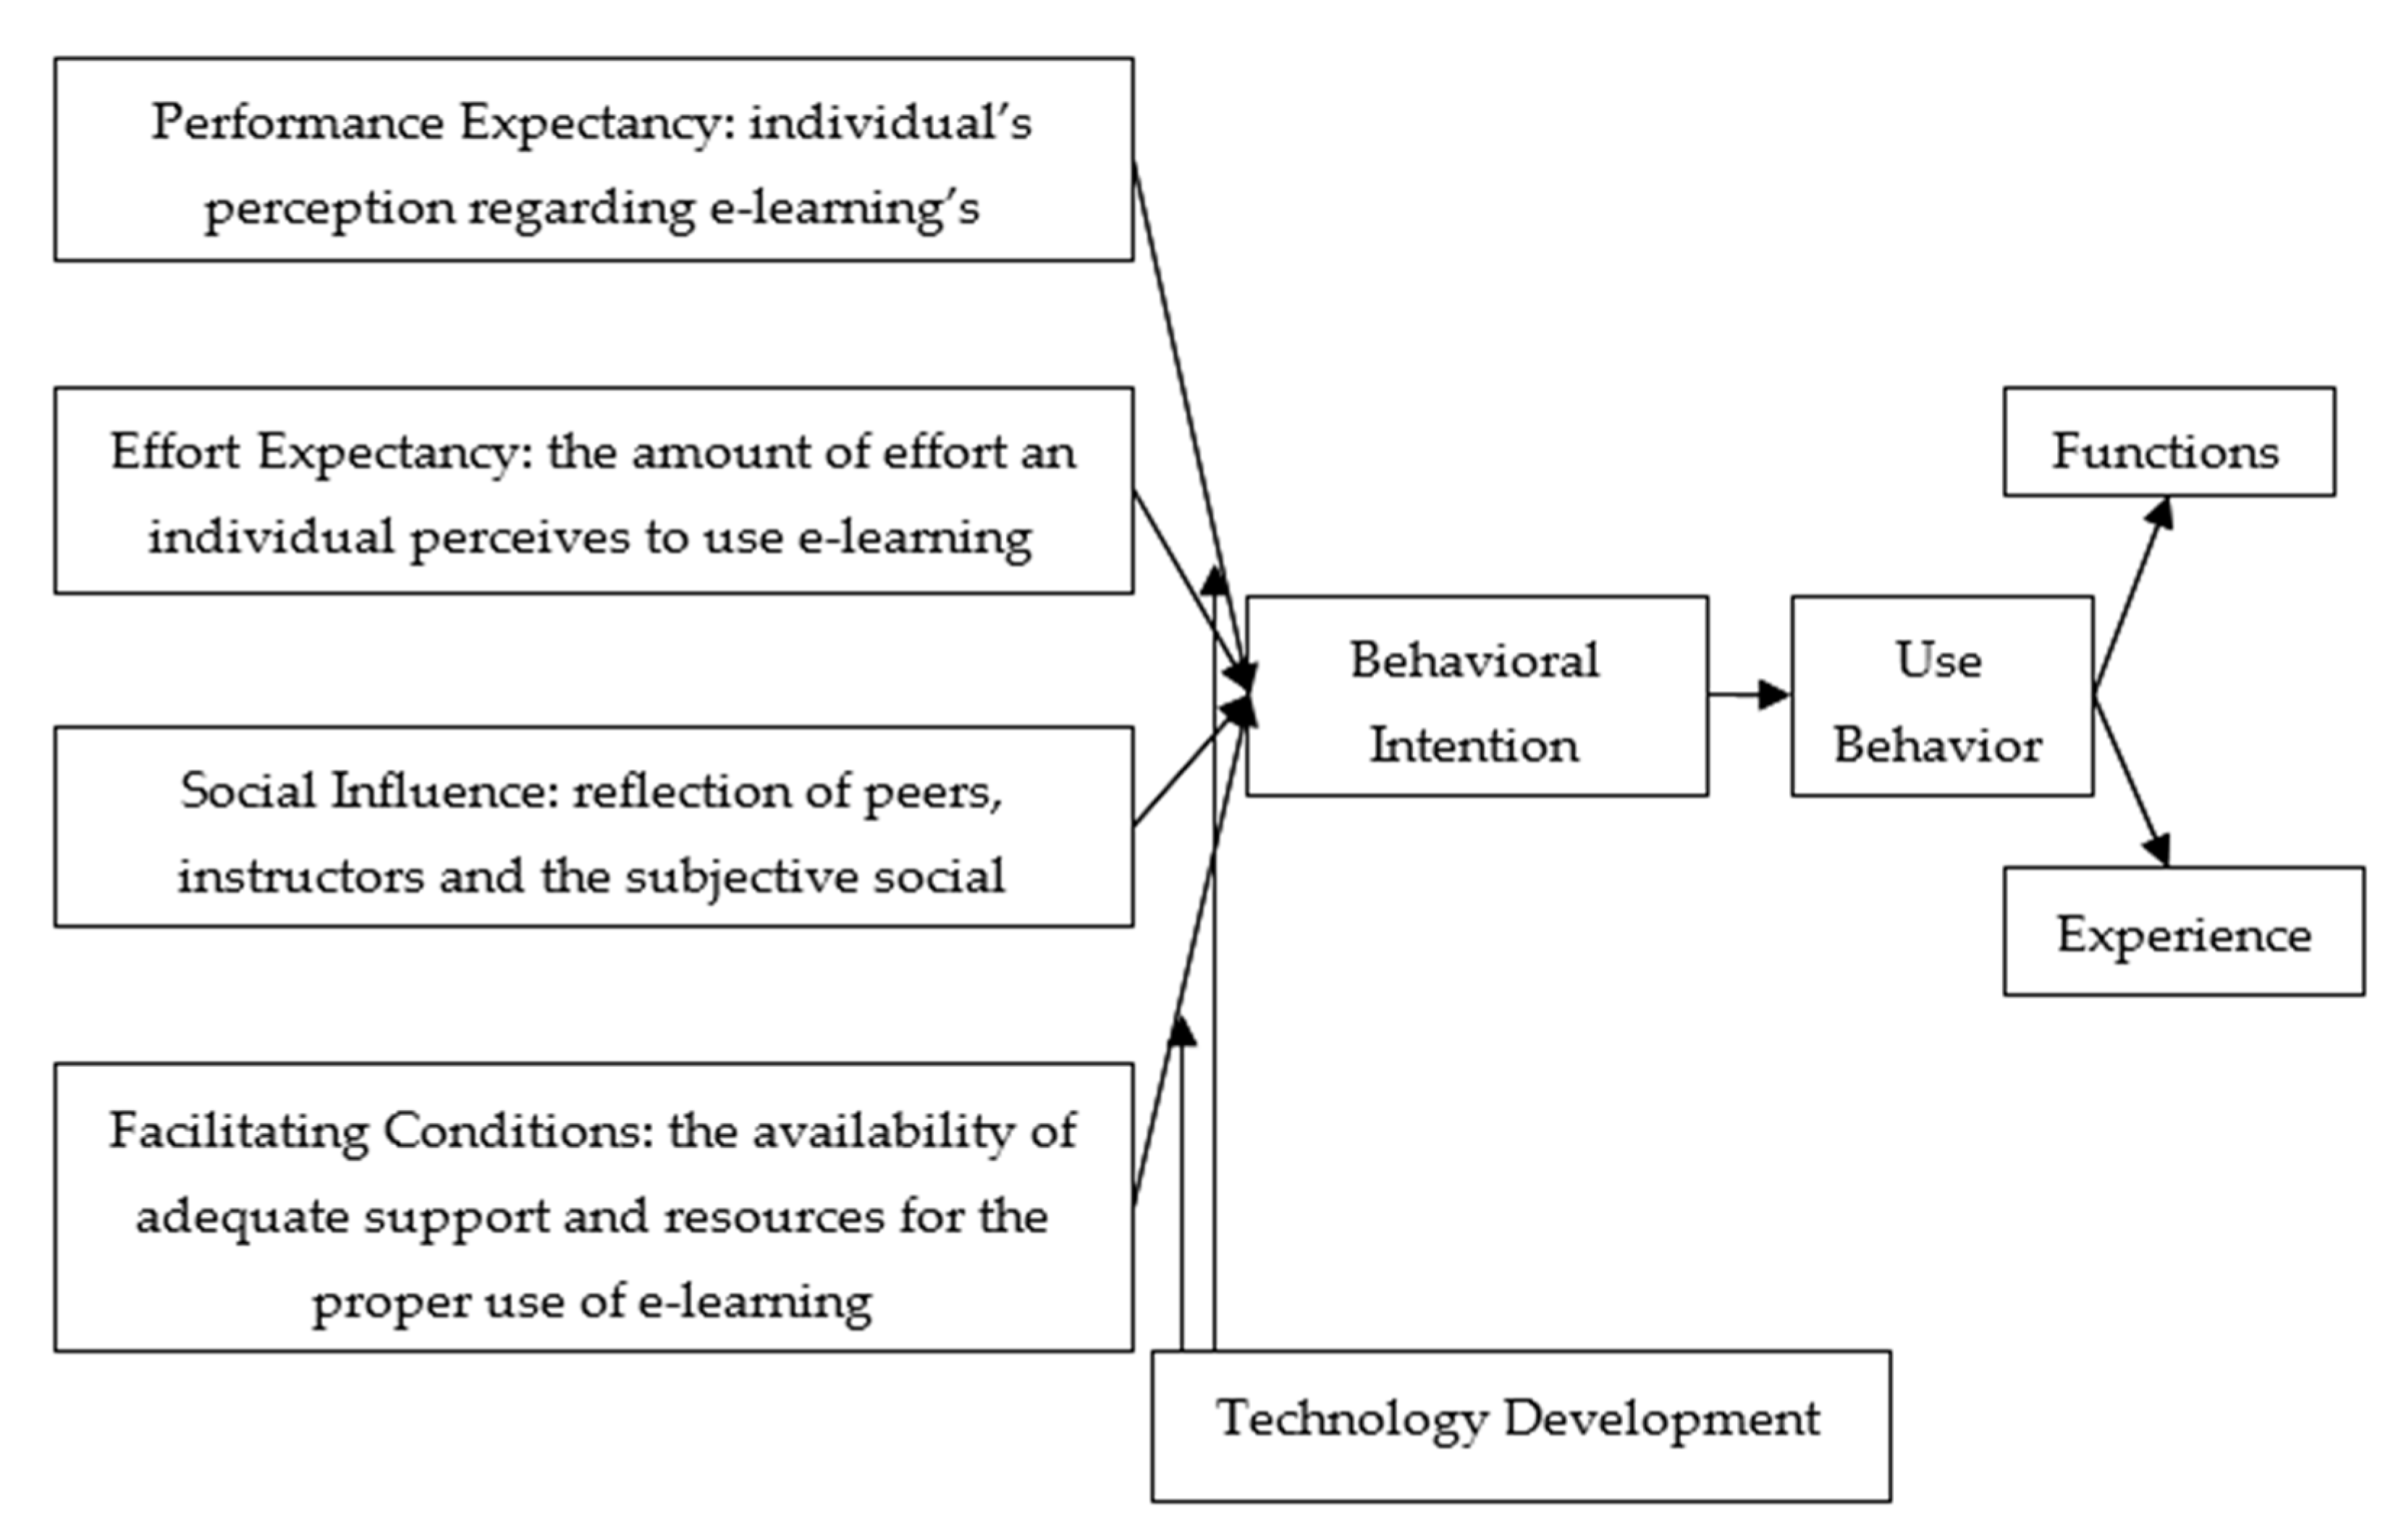 JRFM | Free Full-Text | The Development and Adoption of Online Learning in  Pre- and Post-COVID-19: Combination of Technological System Evolution  Theory and Unified Theory of Acceptance and Use of Technology